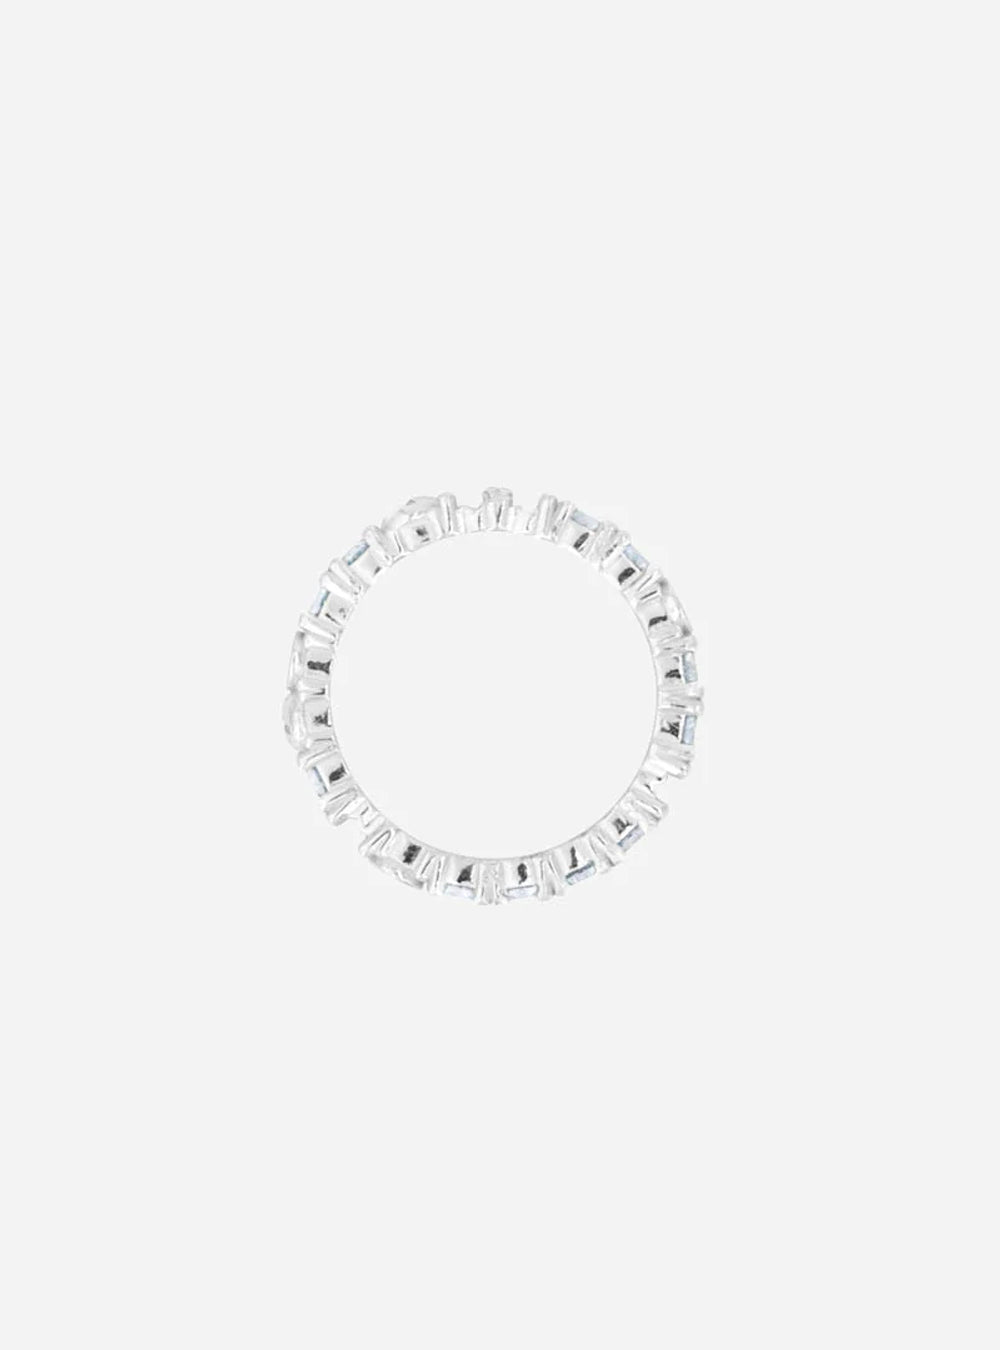 a Broken eternity ring with gray moissanite from MIDNIGHTFACTORY on a white surface.